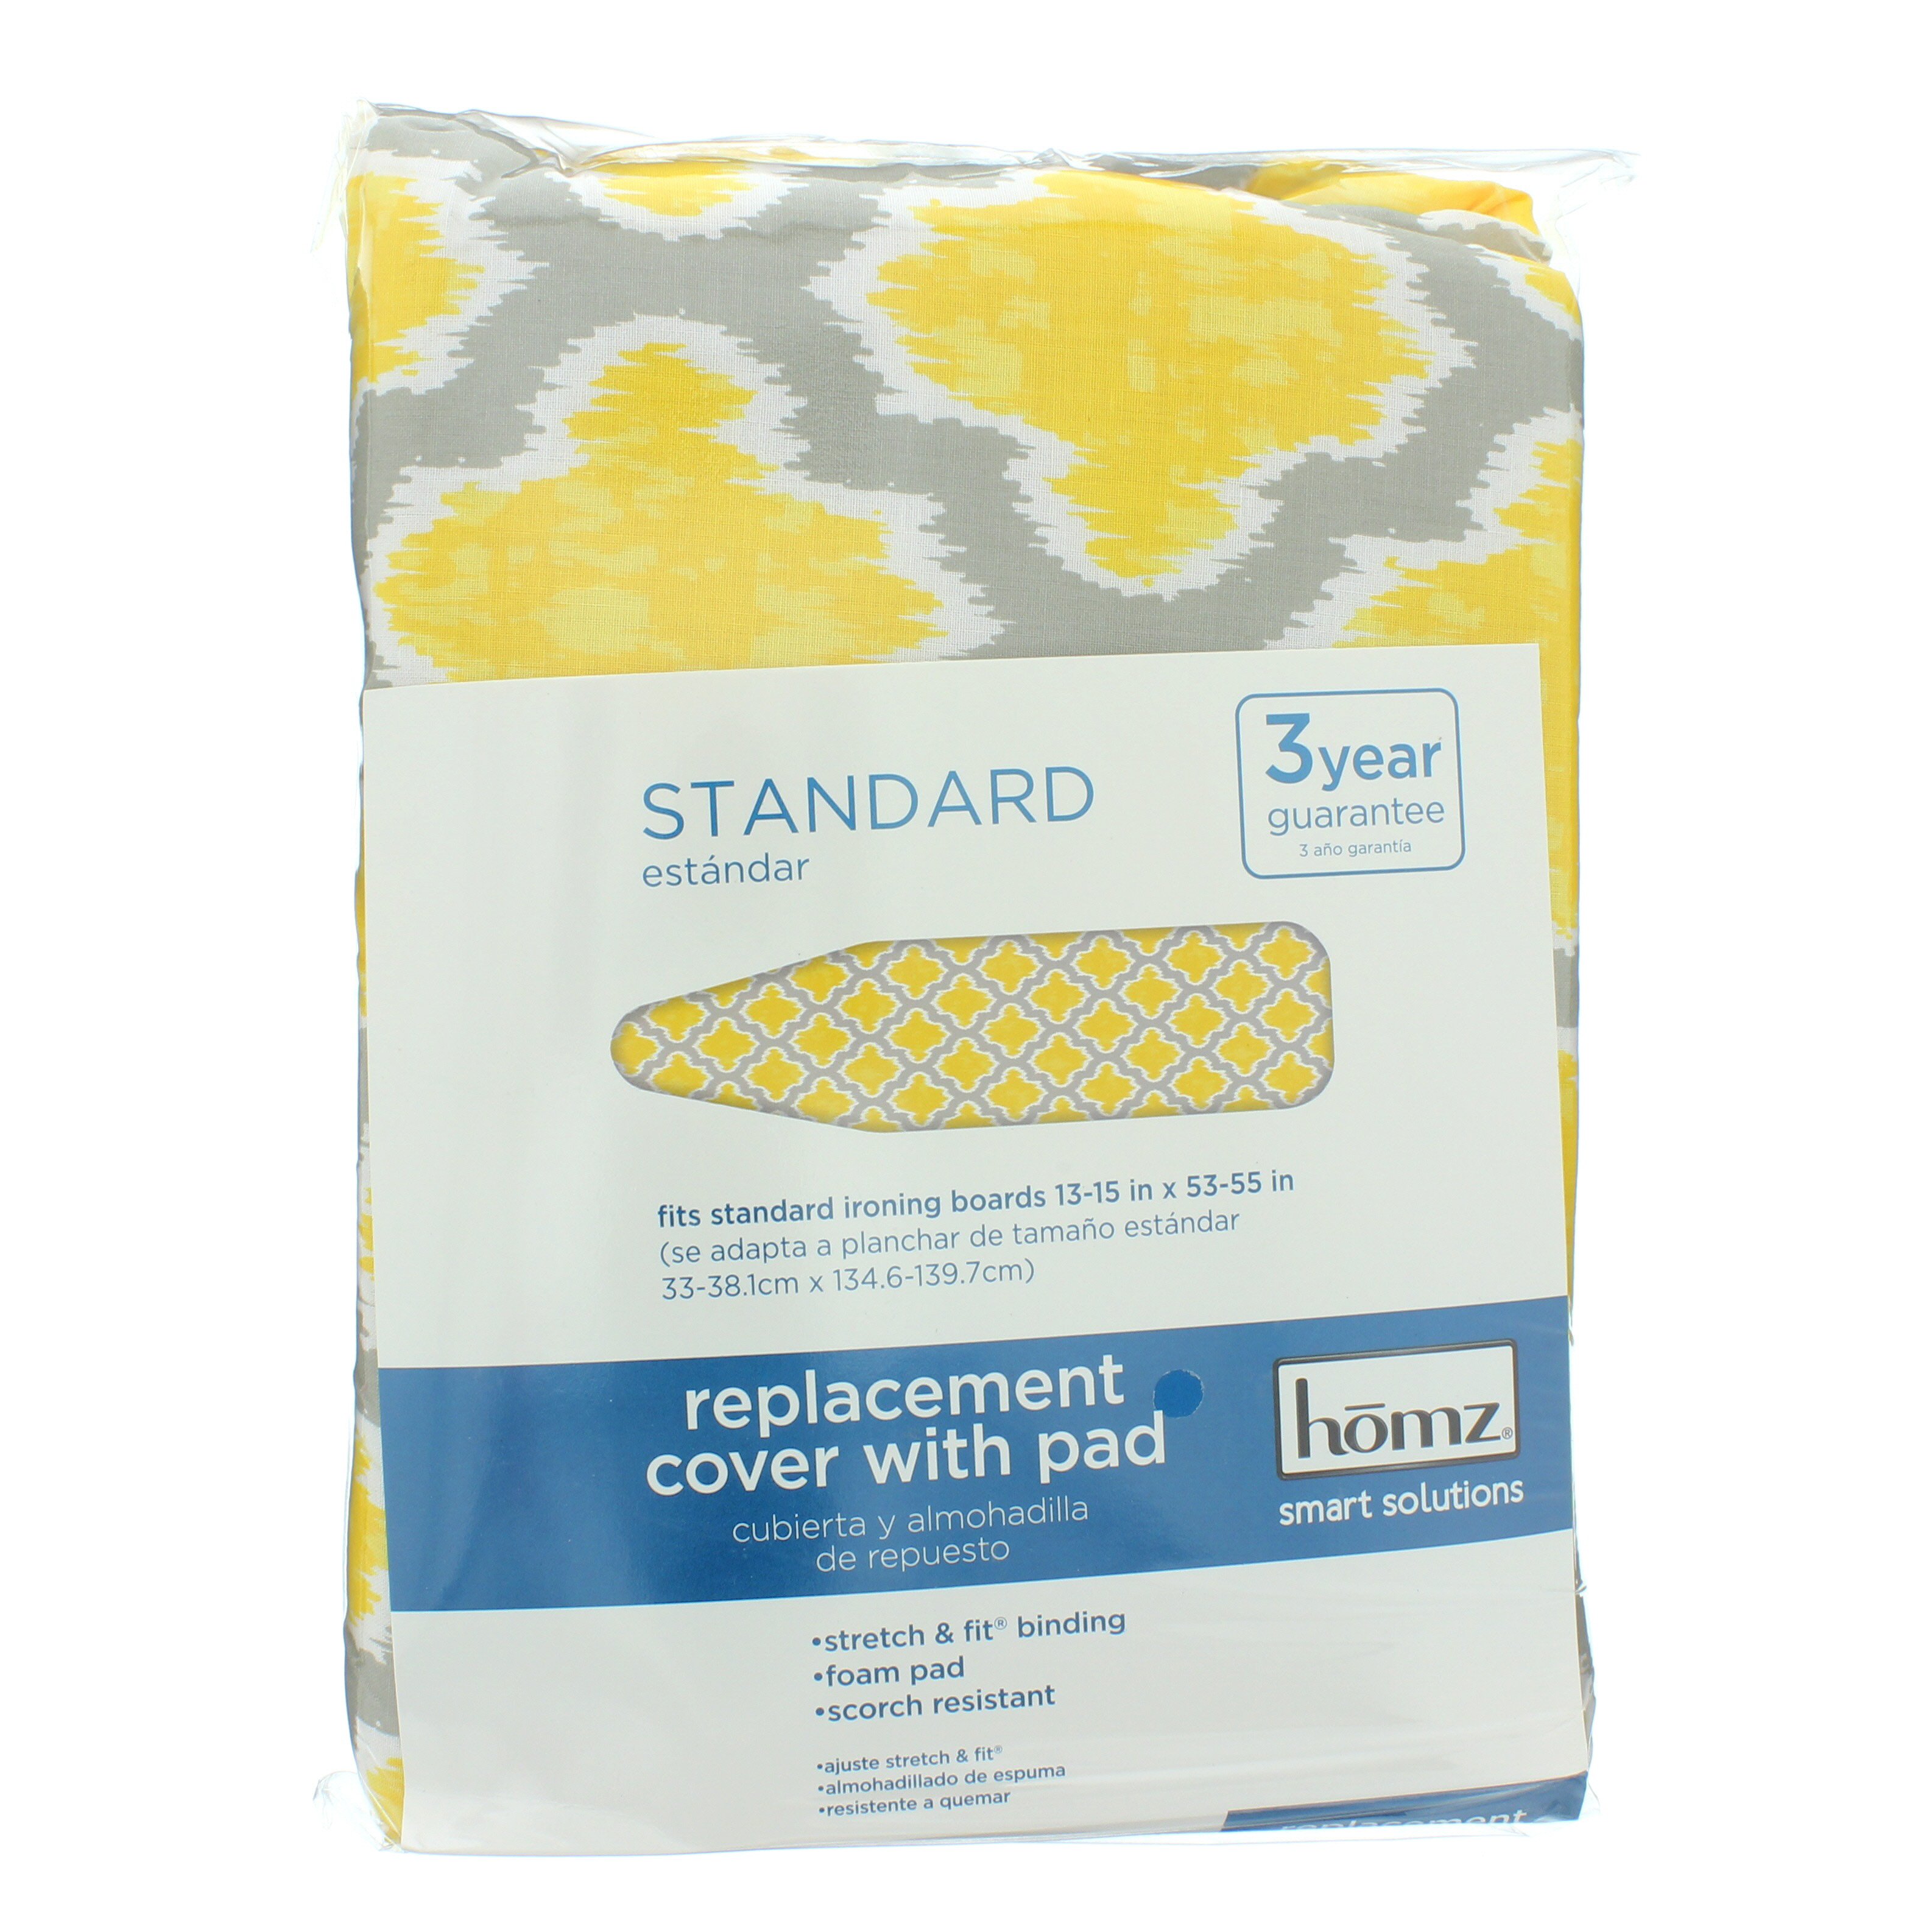 13-15" HOMZ 1945113 Replacement Cover and Pad for Standard Width Ironing Board